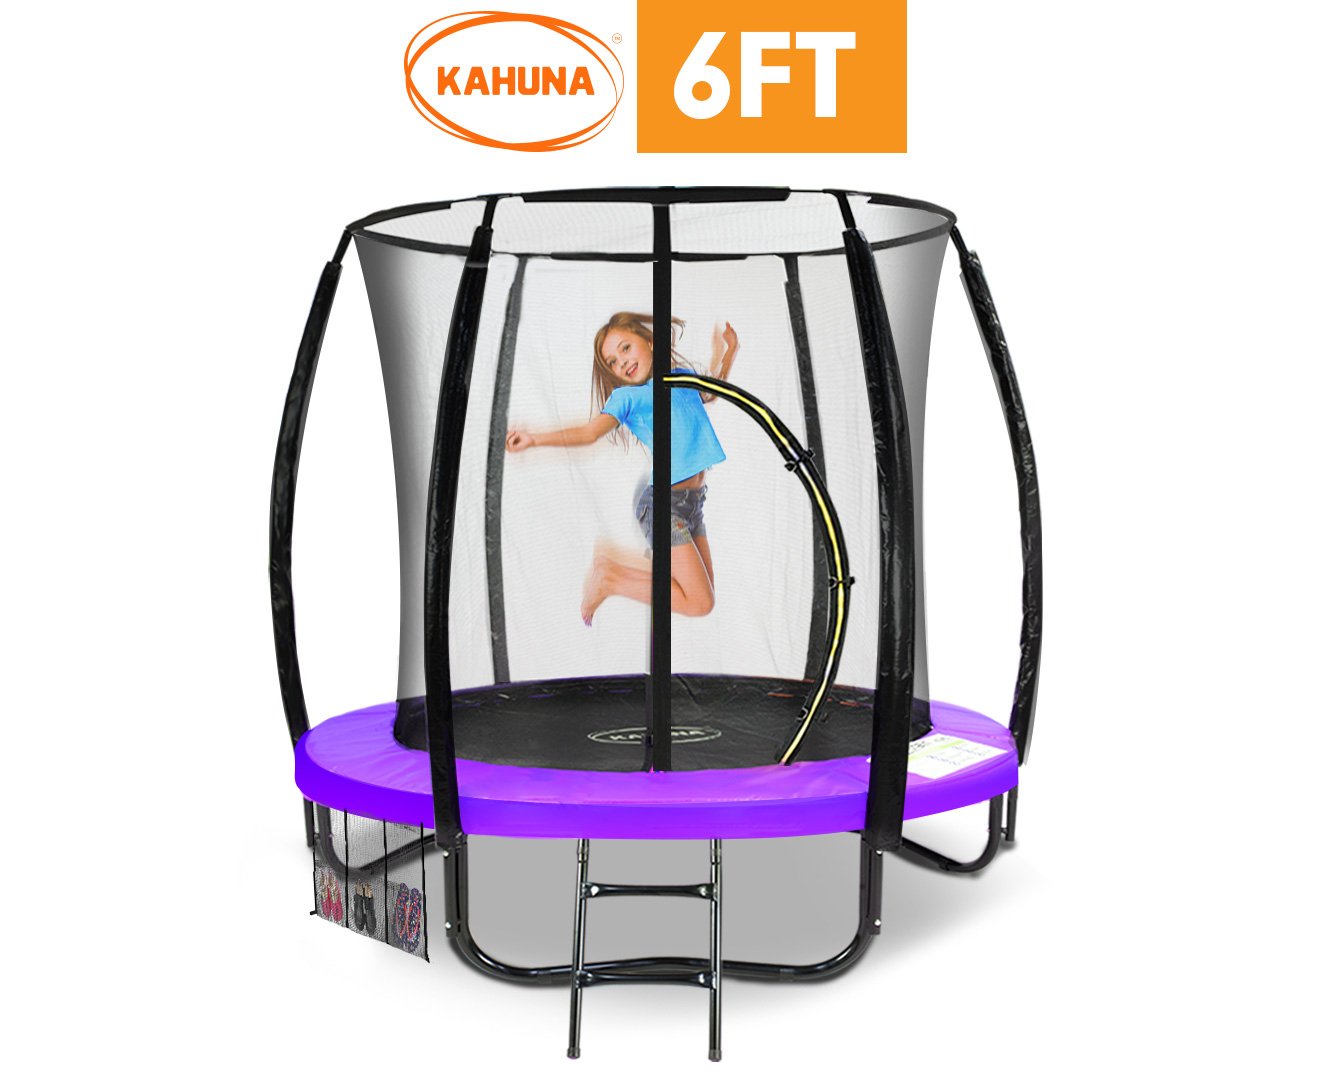 Kahuna Classic 6ft Trampoline Round Outdoor Free Safety Net Spring Pad Cover Mat Purple | Auzzi Store